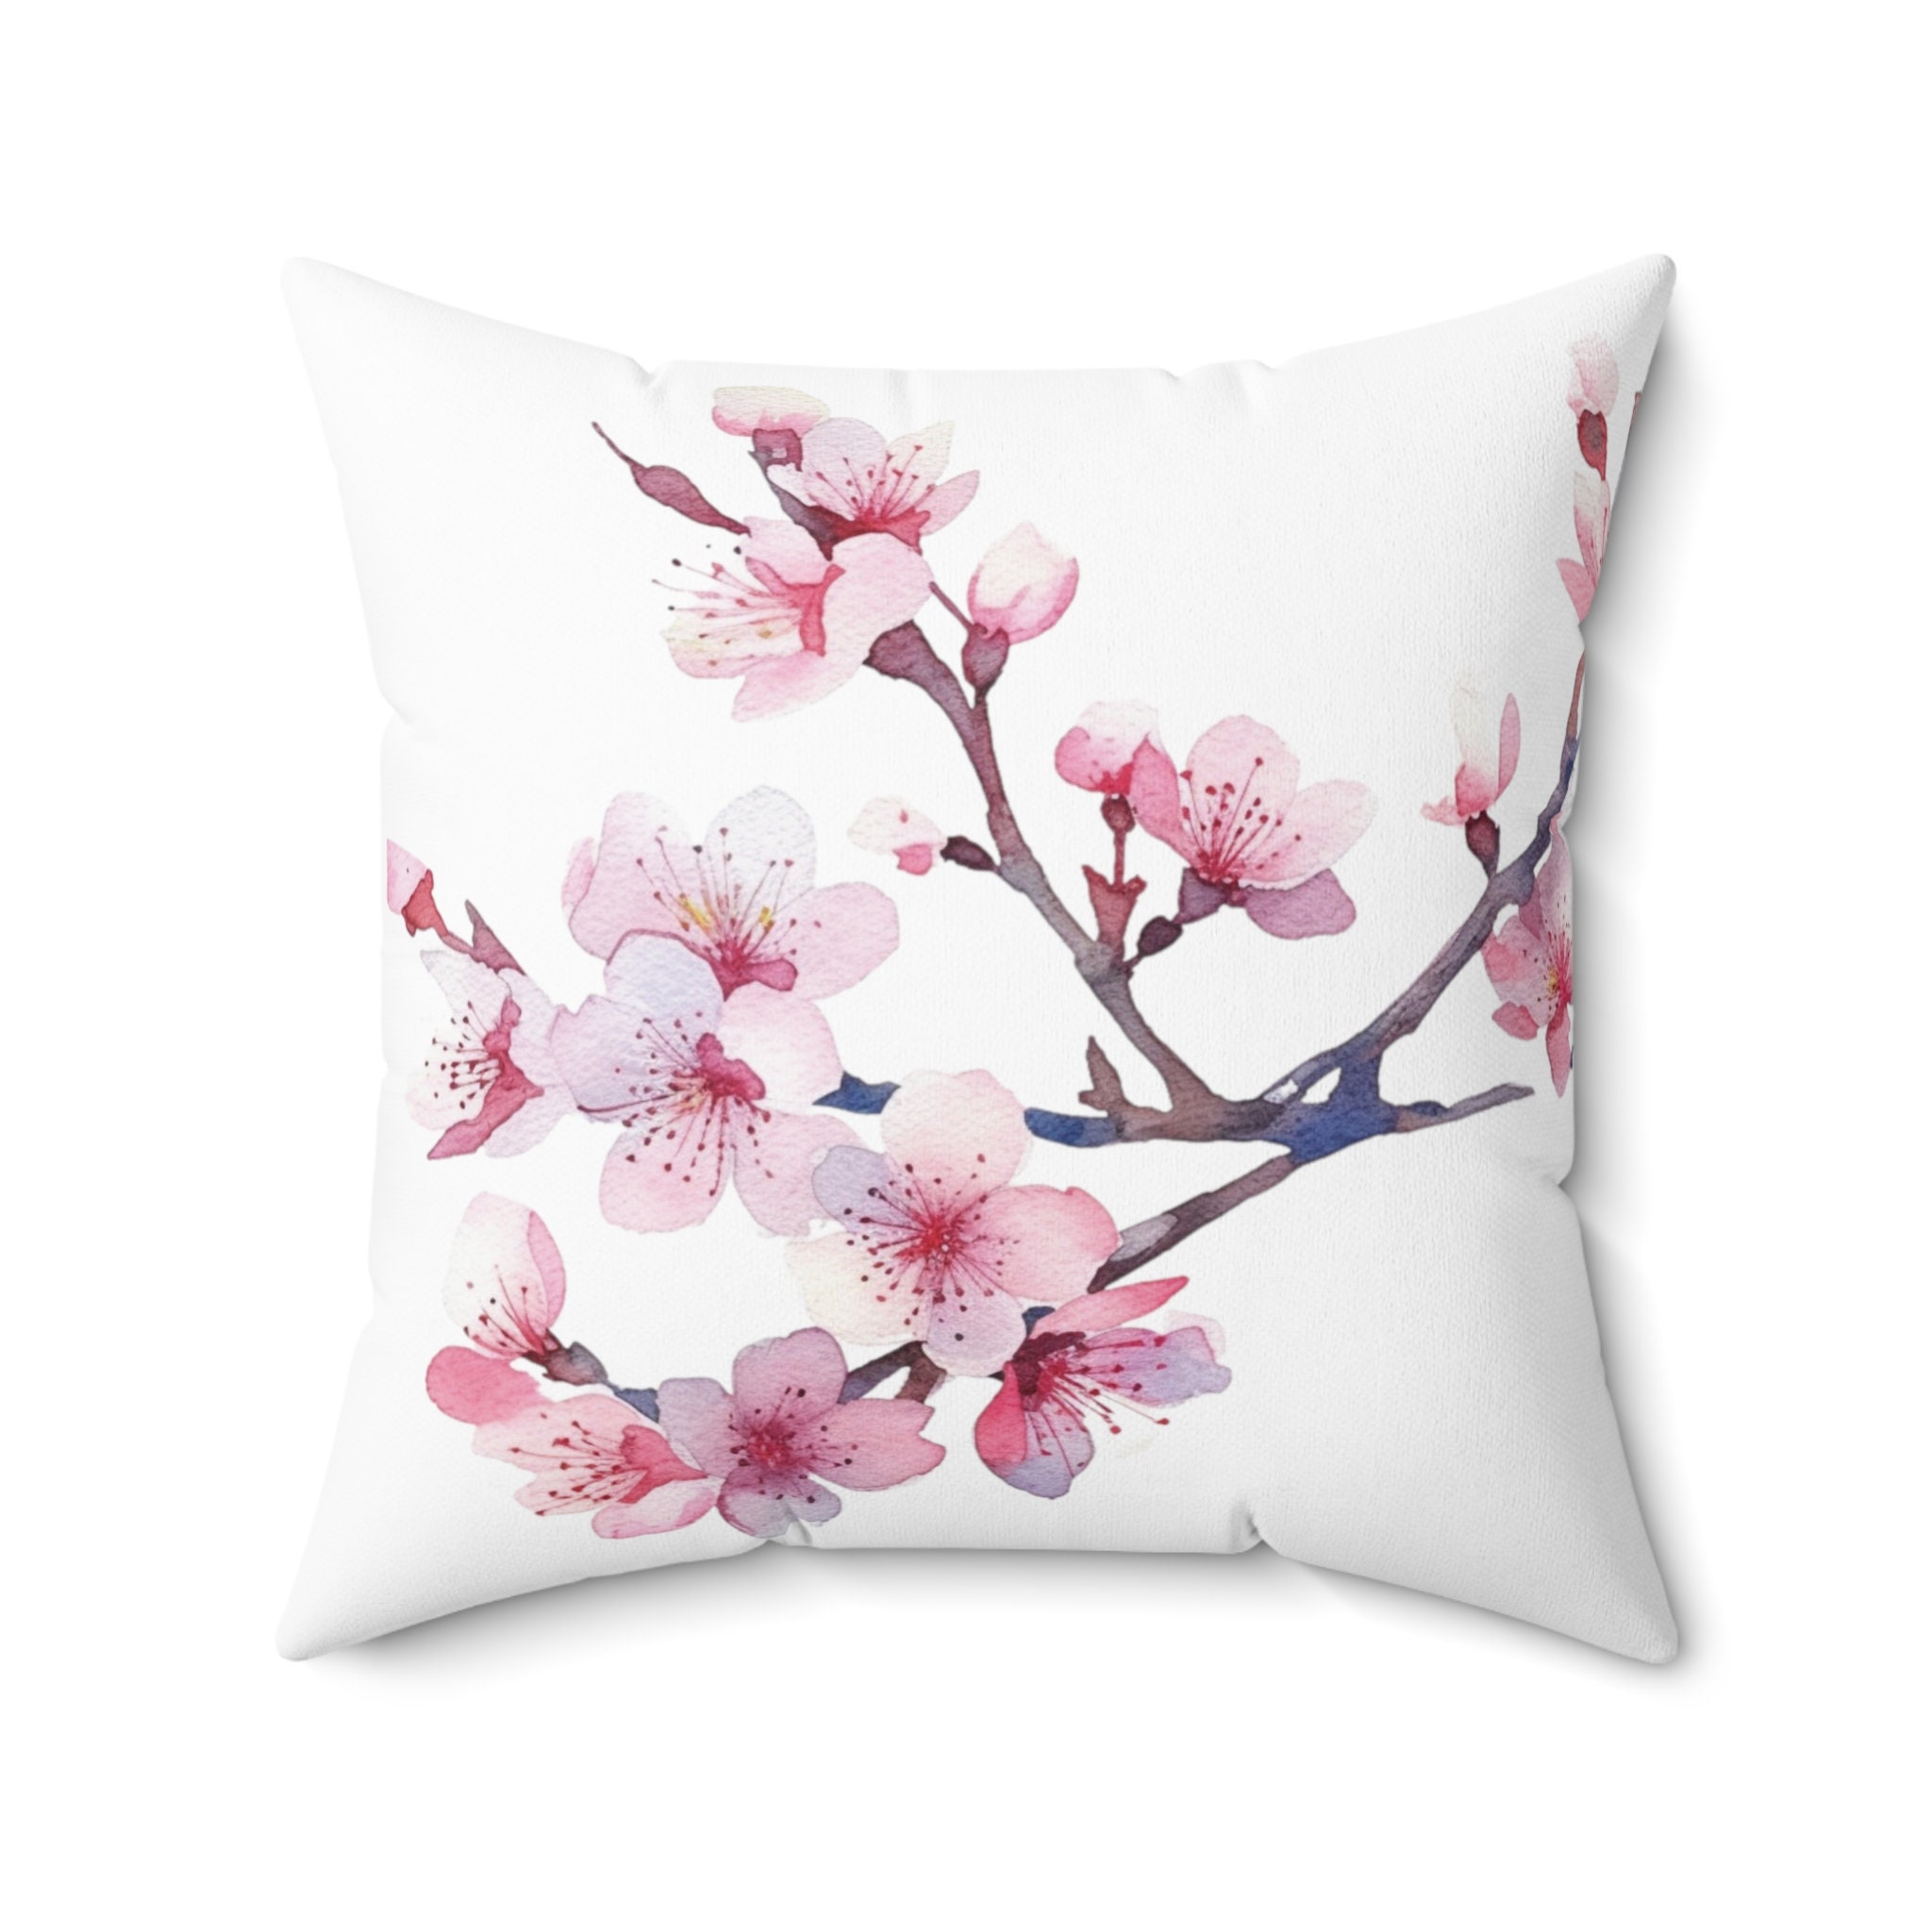 Cherry Blossom Throw Pillow, Cherry Tree Branch, Flower Pillow, Decorative  Pillow, Floral Pillow Cover, Gift for Her, Pink Pillowcase, Vl 